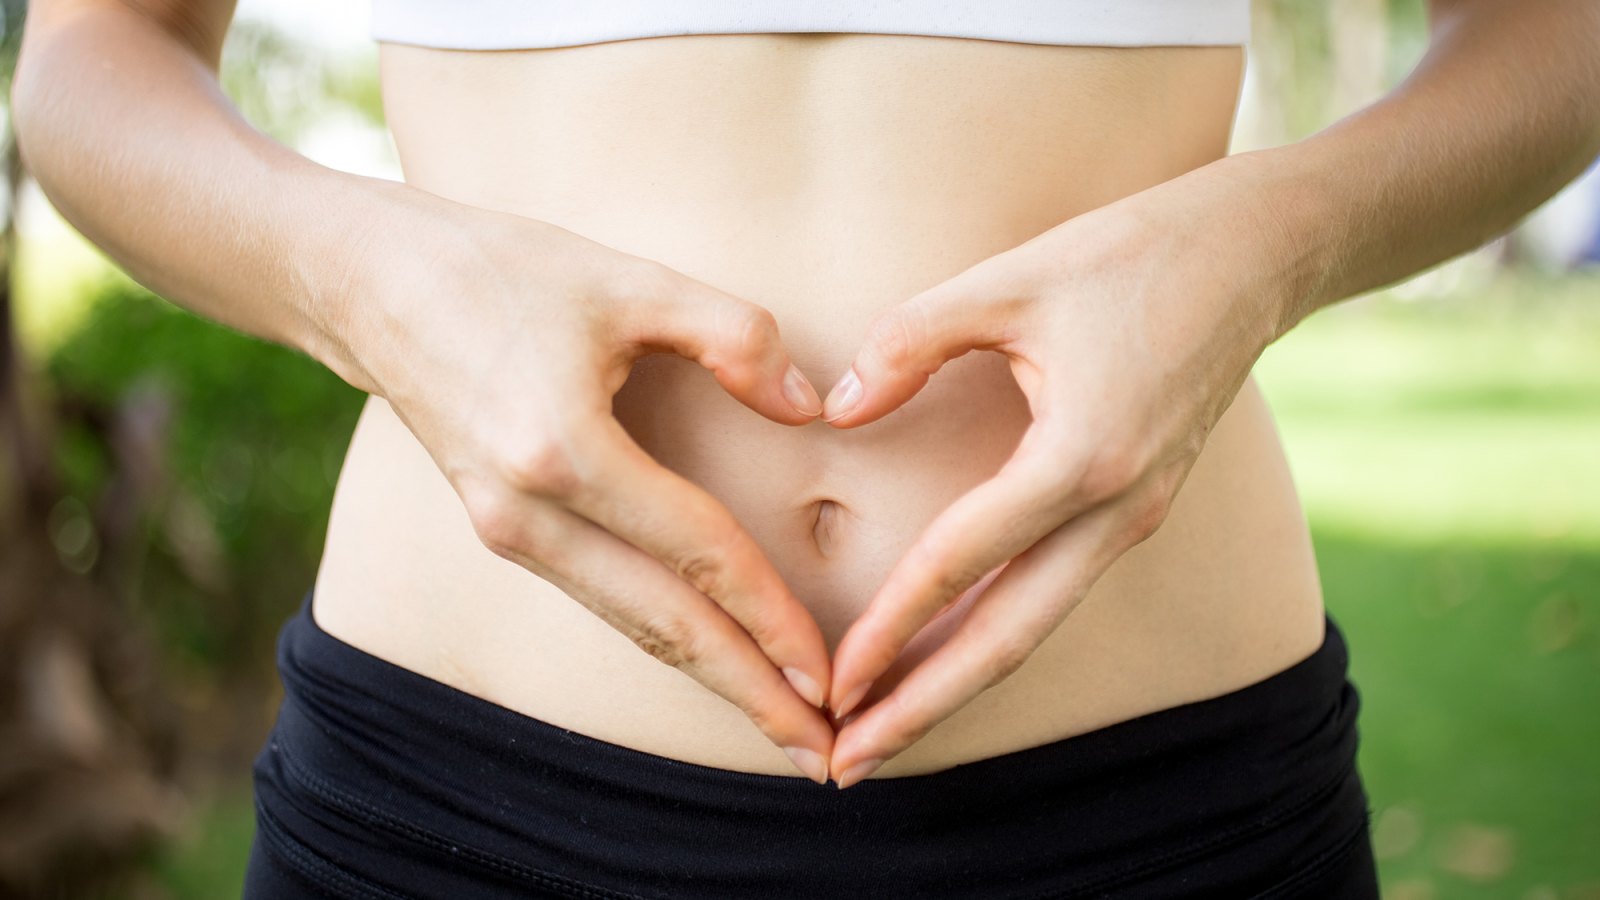 The Best Probiotics for Women Interested in Weight Loss